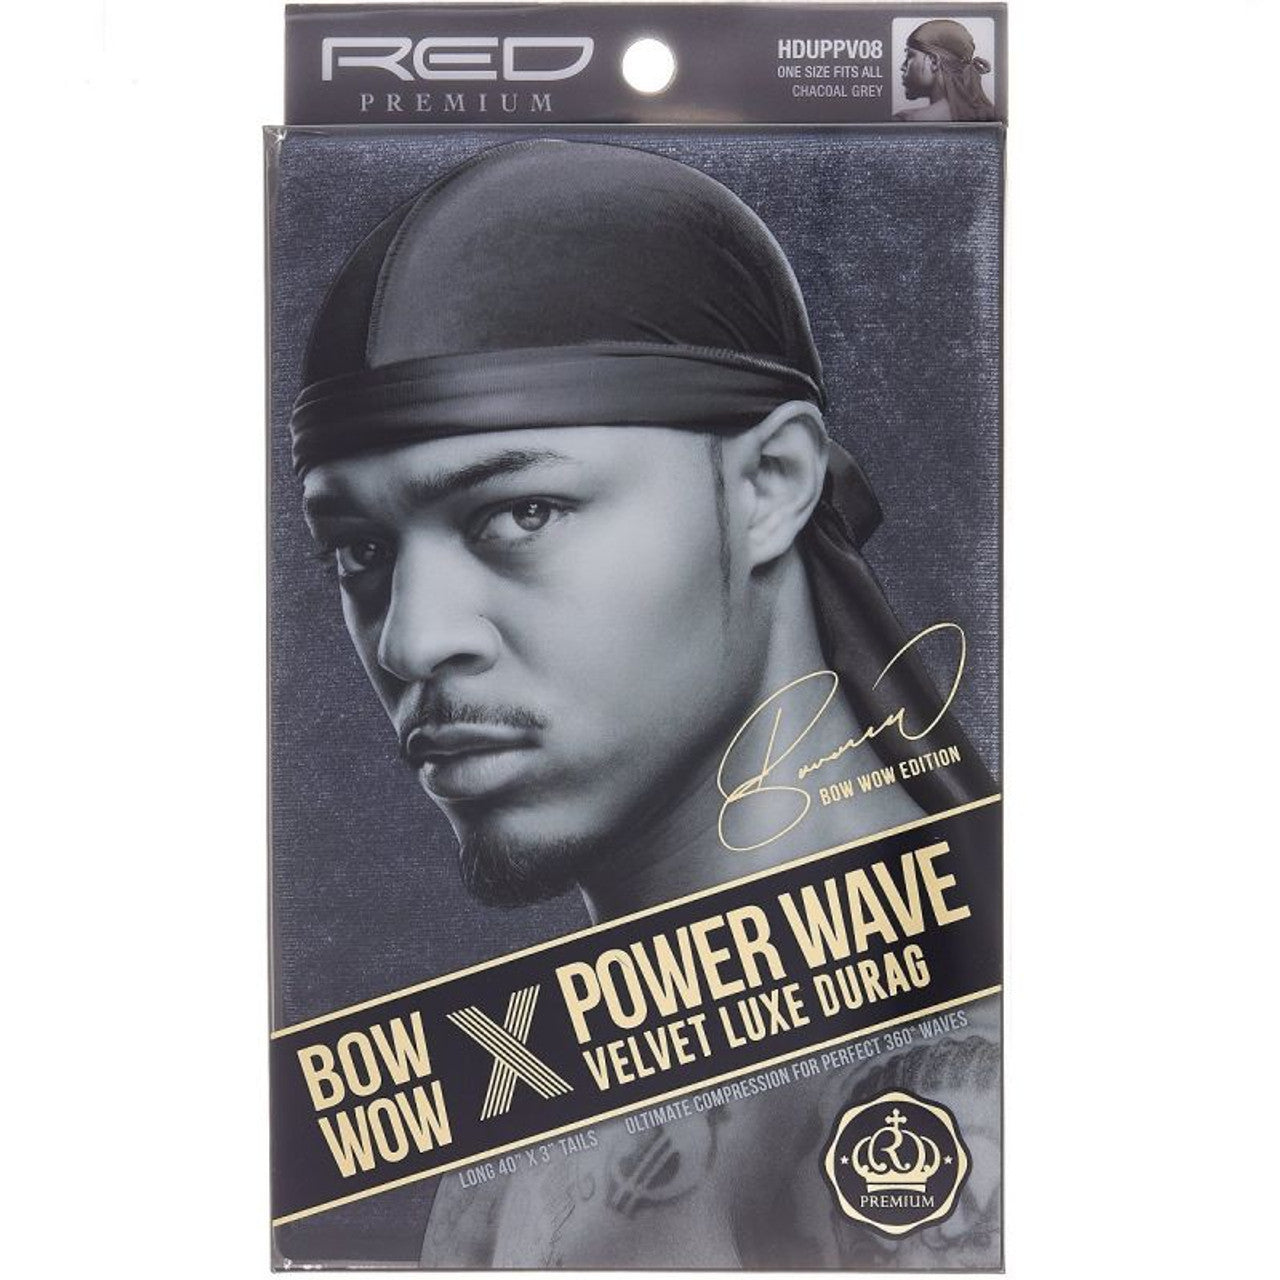 Red Premium Bow Wow X Power Wave Velvet Luxe Durag - Charcoal Gray - #HDUPPV08